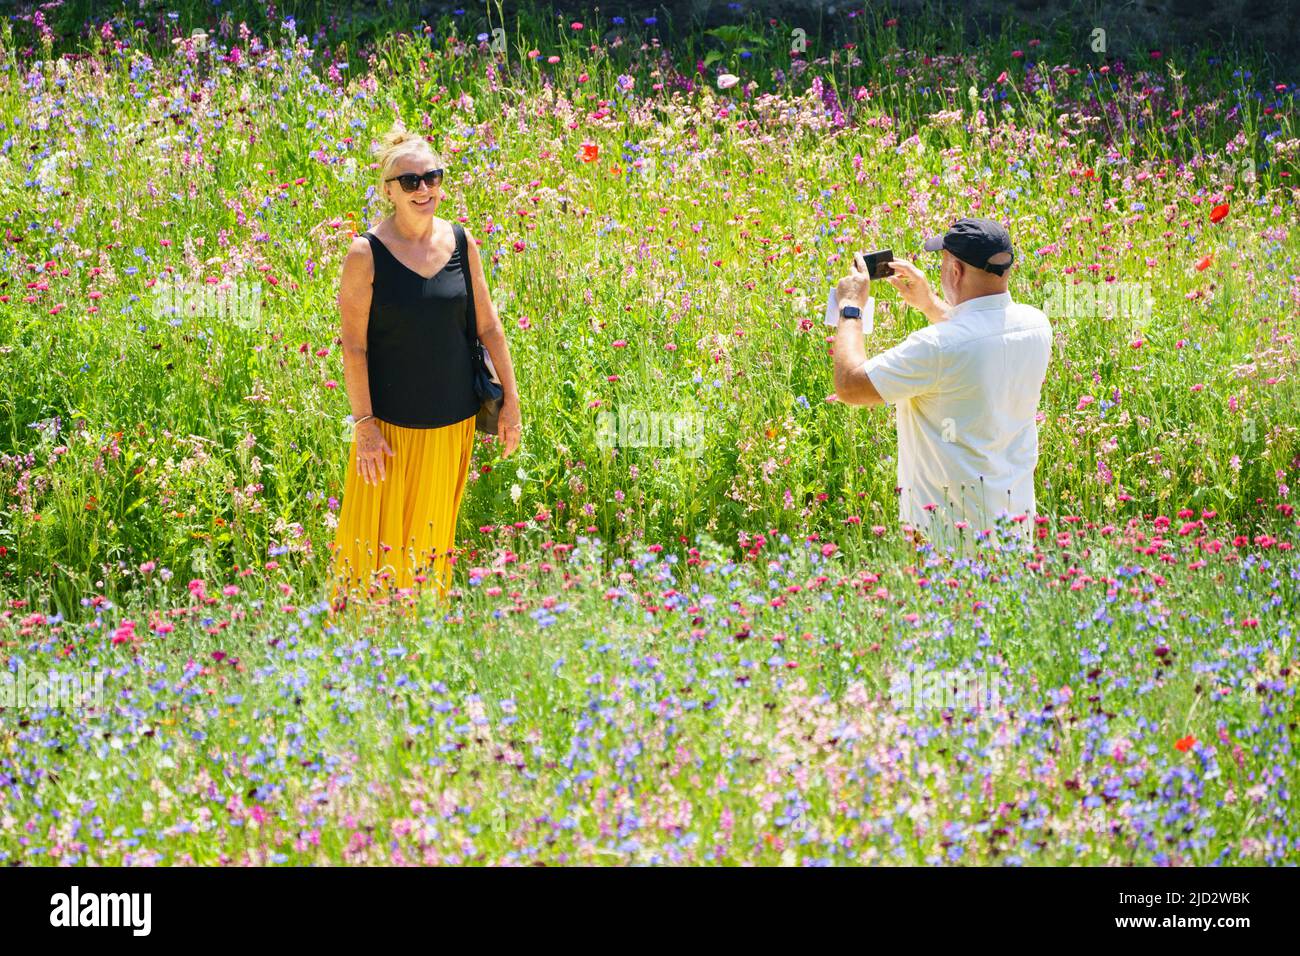 https://c8.alamy.com/comp/2JD2WBK/a-woman-poses-for-a-photo-among-the-flowers-of-the-superbloom-garden-in-the-moat-of-the-tower-of-london-in-london-a-sweltering-34c-932f-is-expected-in-london-and-potentially-some-spots-in-east-anglia-on-friday-according-to-the-met-office-picture-date-friday-june-17-2022-2JD2WBK.jpg